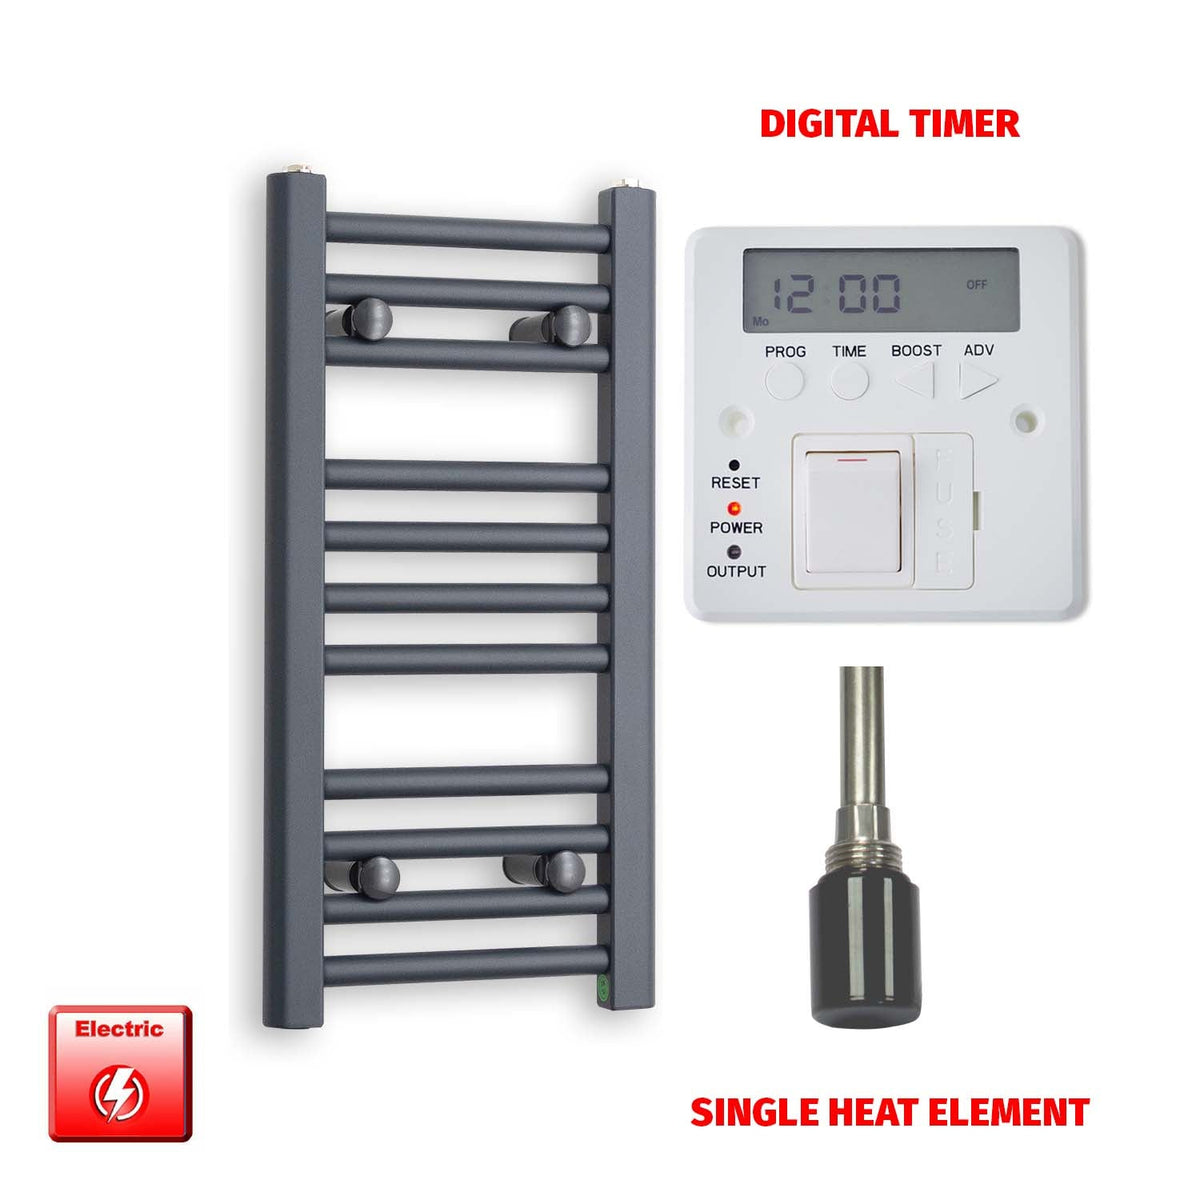 600 x 300 Flat Anthracite Pre-Filled Electric Heated Towel Radiator HTR Single heat element Digital timer